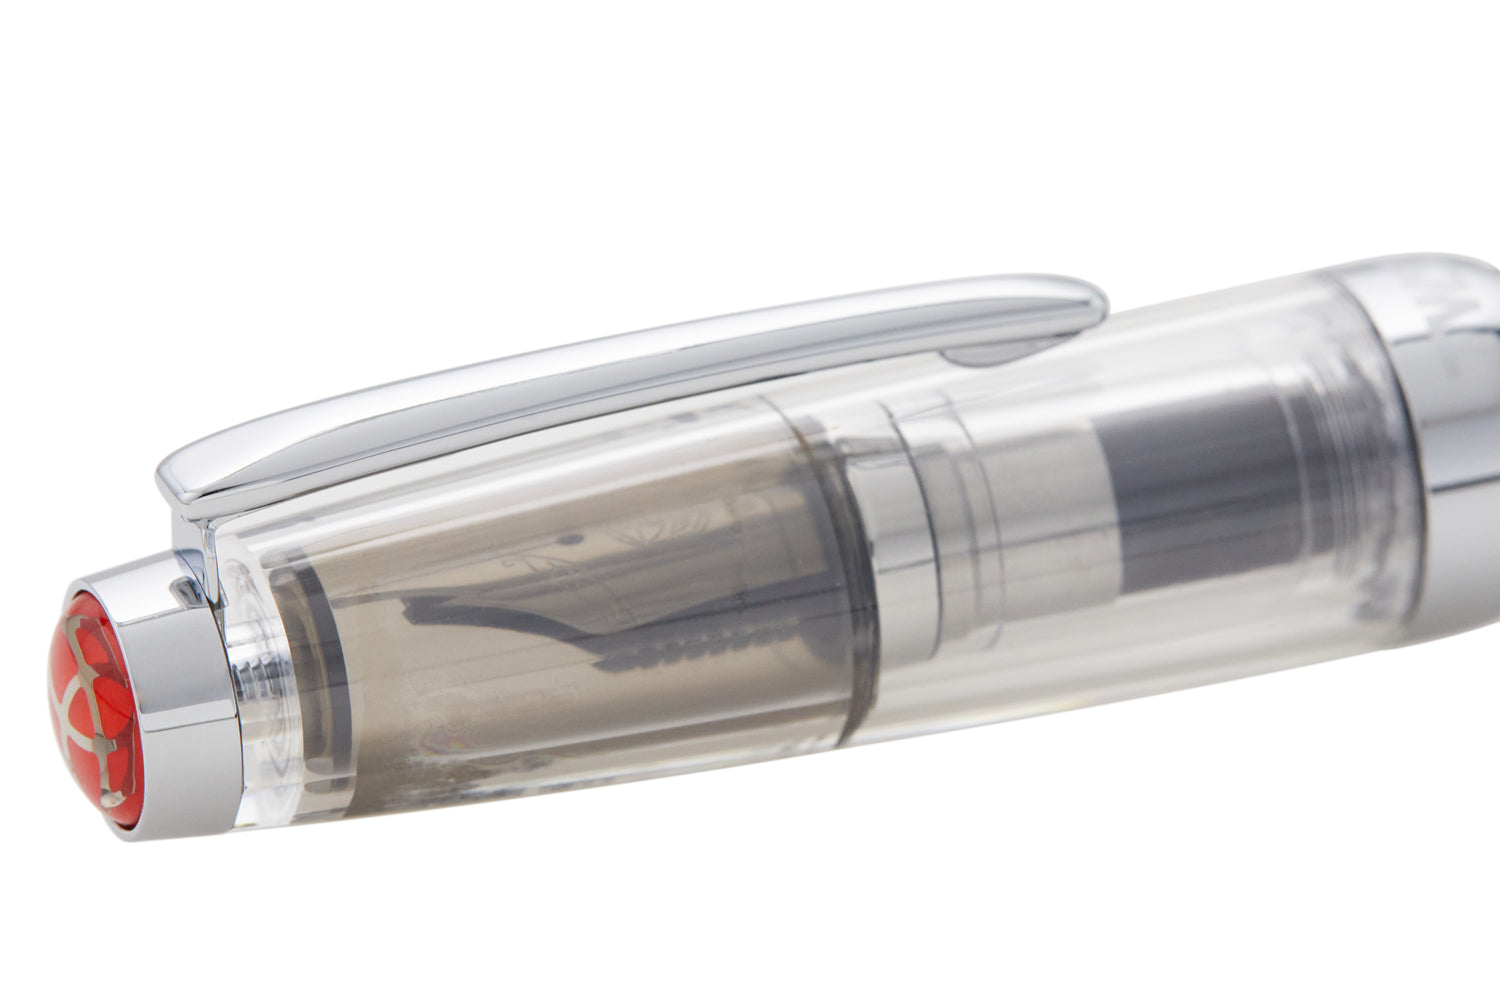 TWSBI Vac Mini Fountain Pen In Clear Demonstrator/Black, Made with  High-quality PMMA Material and Stainless Steel Nib - AliExpress